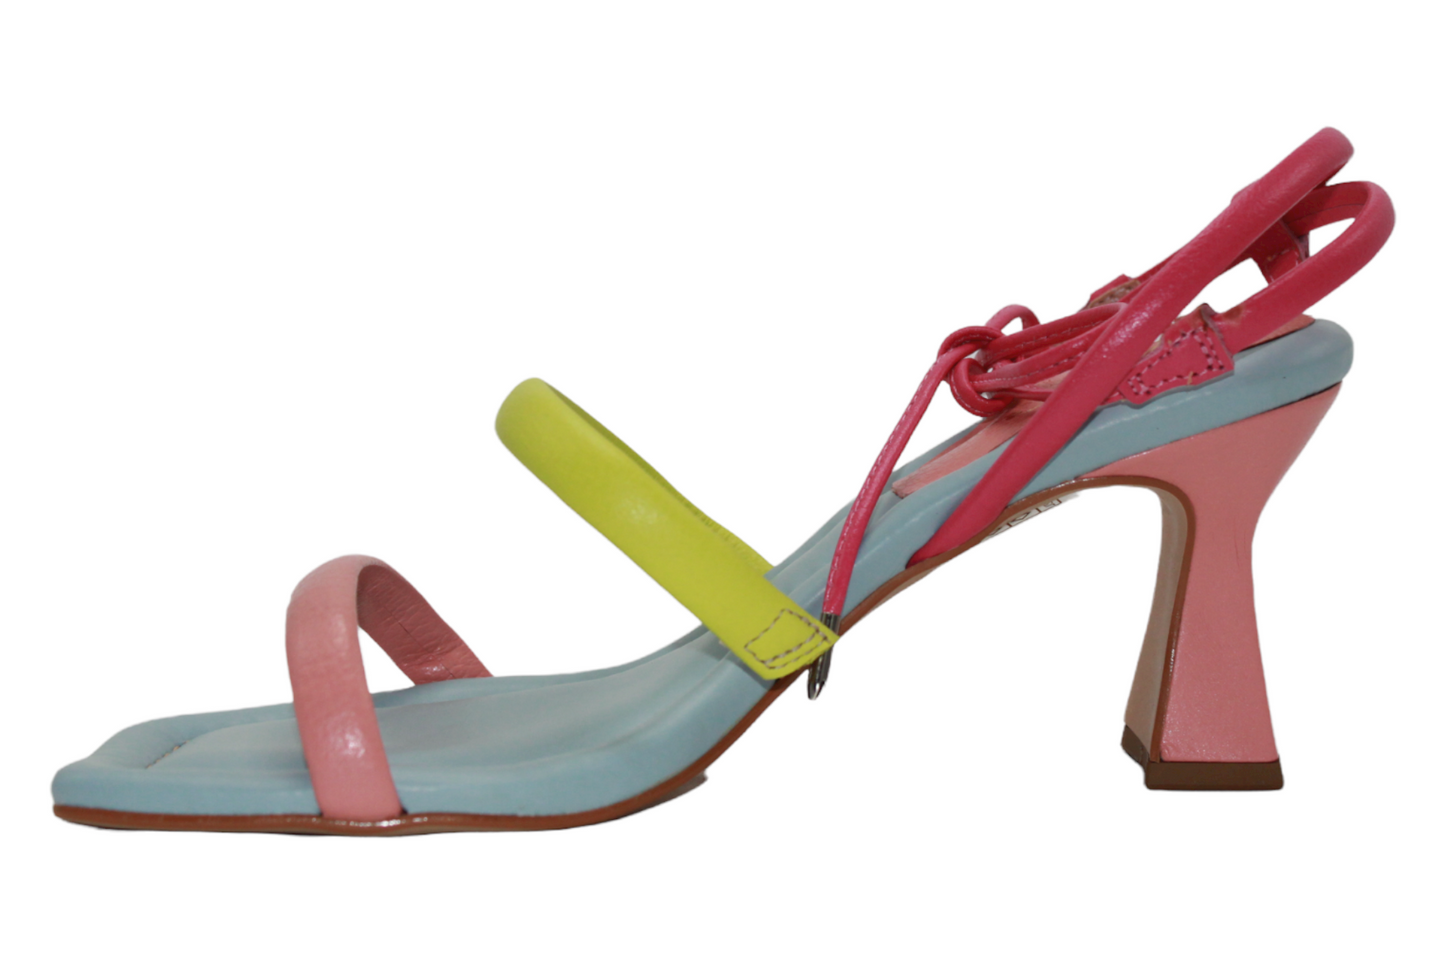 Multicolored Neon Heeled Sandals